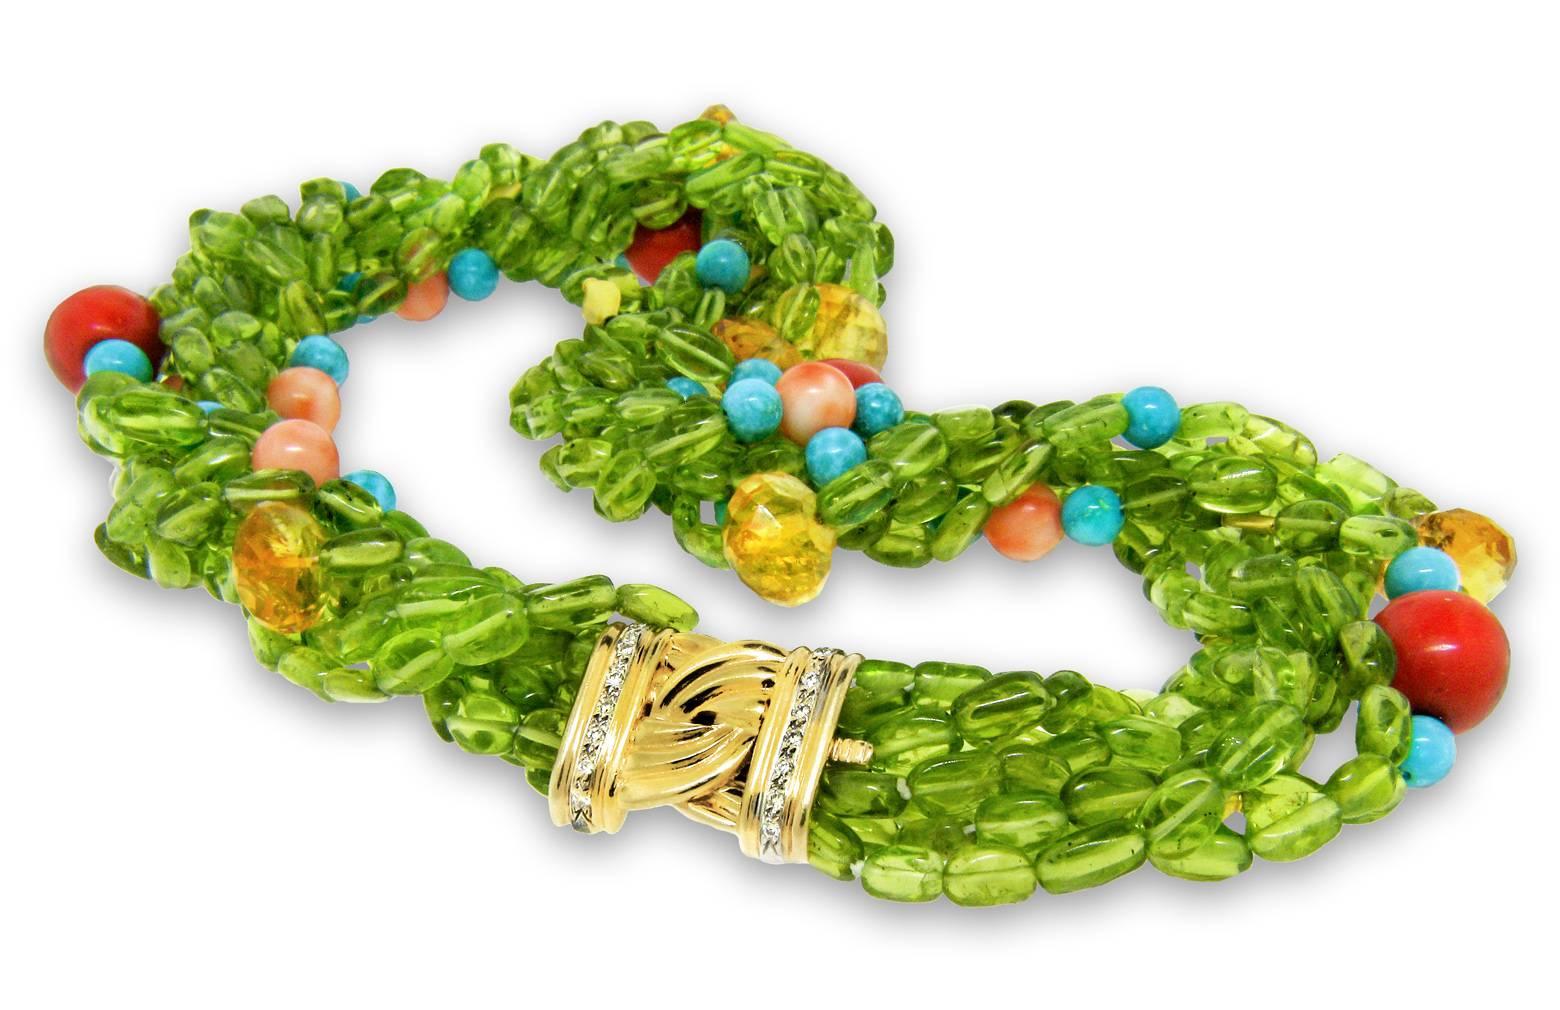 This elegant 8-strand Peridot necklace by Danuta, features a variety of stones consisting of antique coral beads, faceted Citrine, Sleeping Beauty Turquoise, and Peridot beads interspersed with 18k gold separator beads.

The decorative clasp is 18k